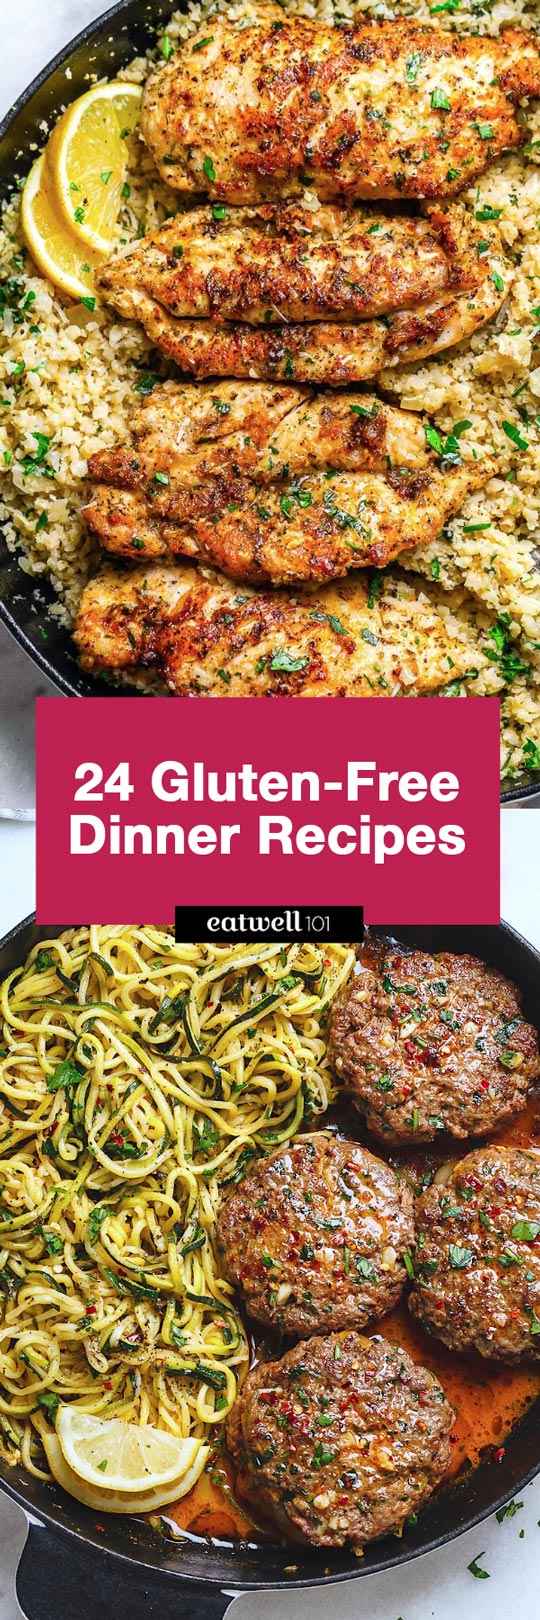 Gluten-Free Dinner Recipes - These menu options skip grains and wheat. See how delicious eating gluten-free can be!